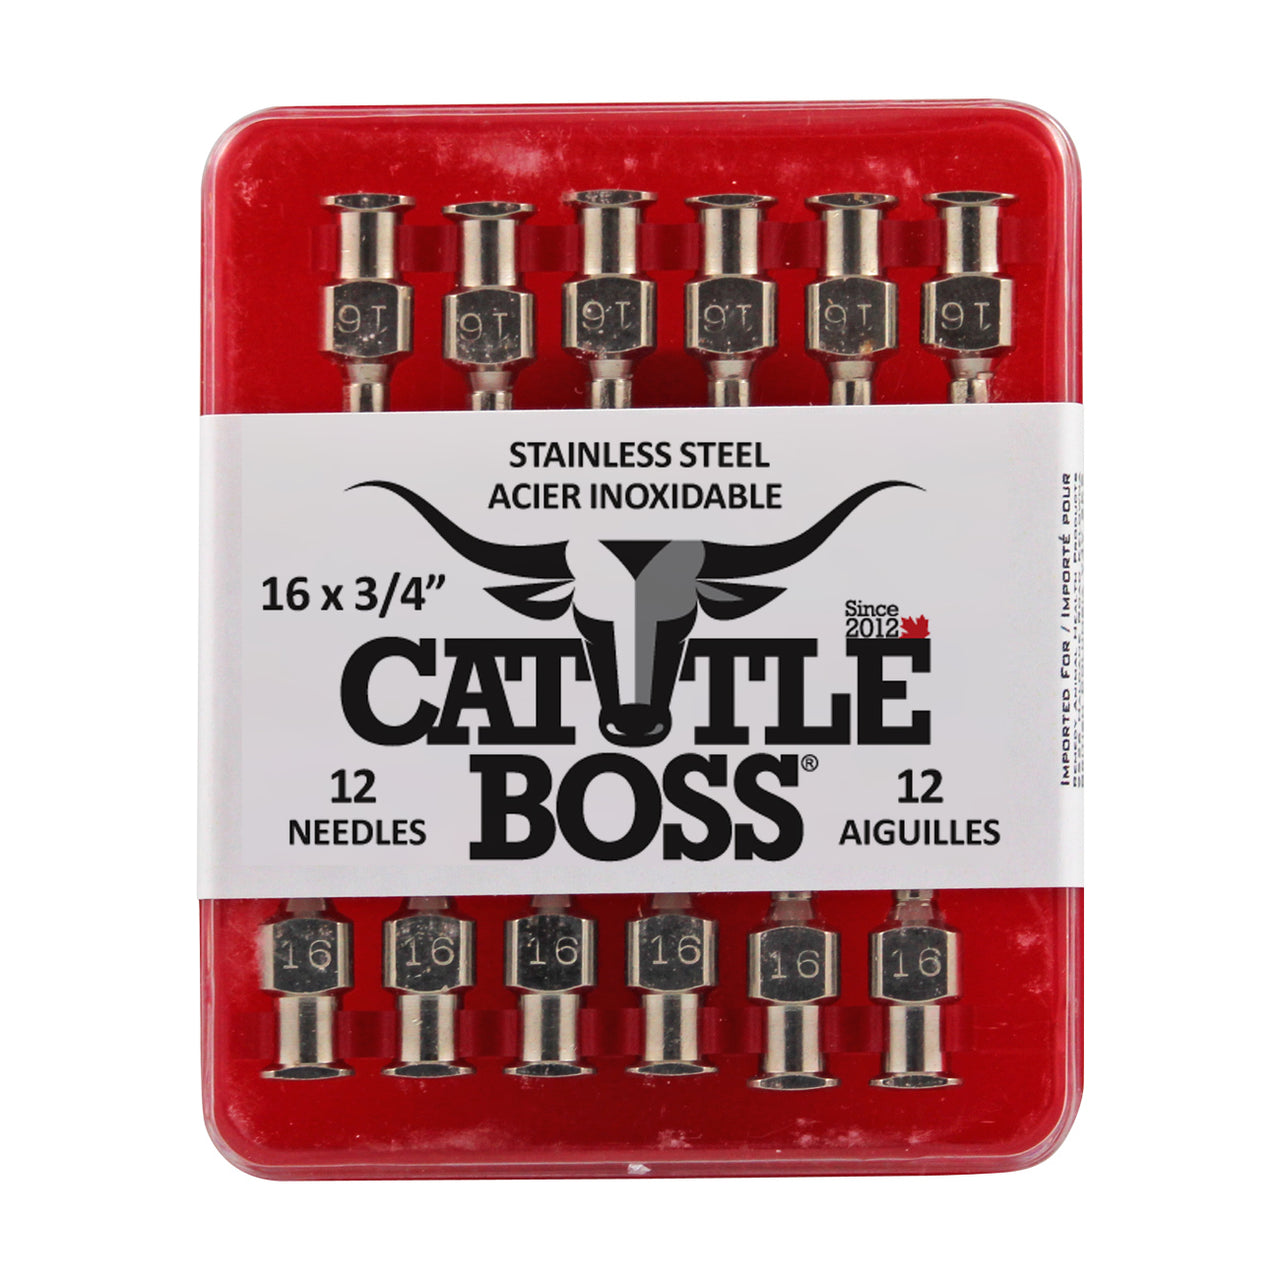 Cattle Boss Stainless Steel Hub Needle (12 Pack) 16X3/4 - Drug Administration Cattle Boss - Canada